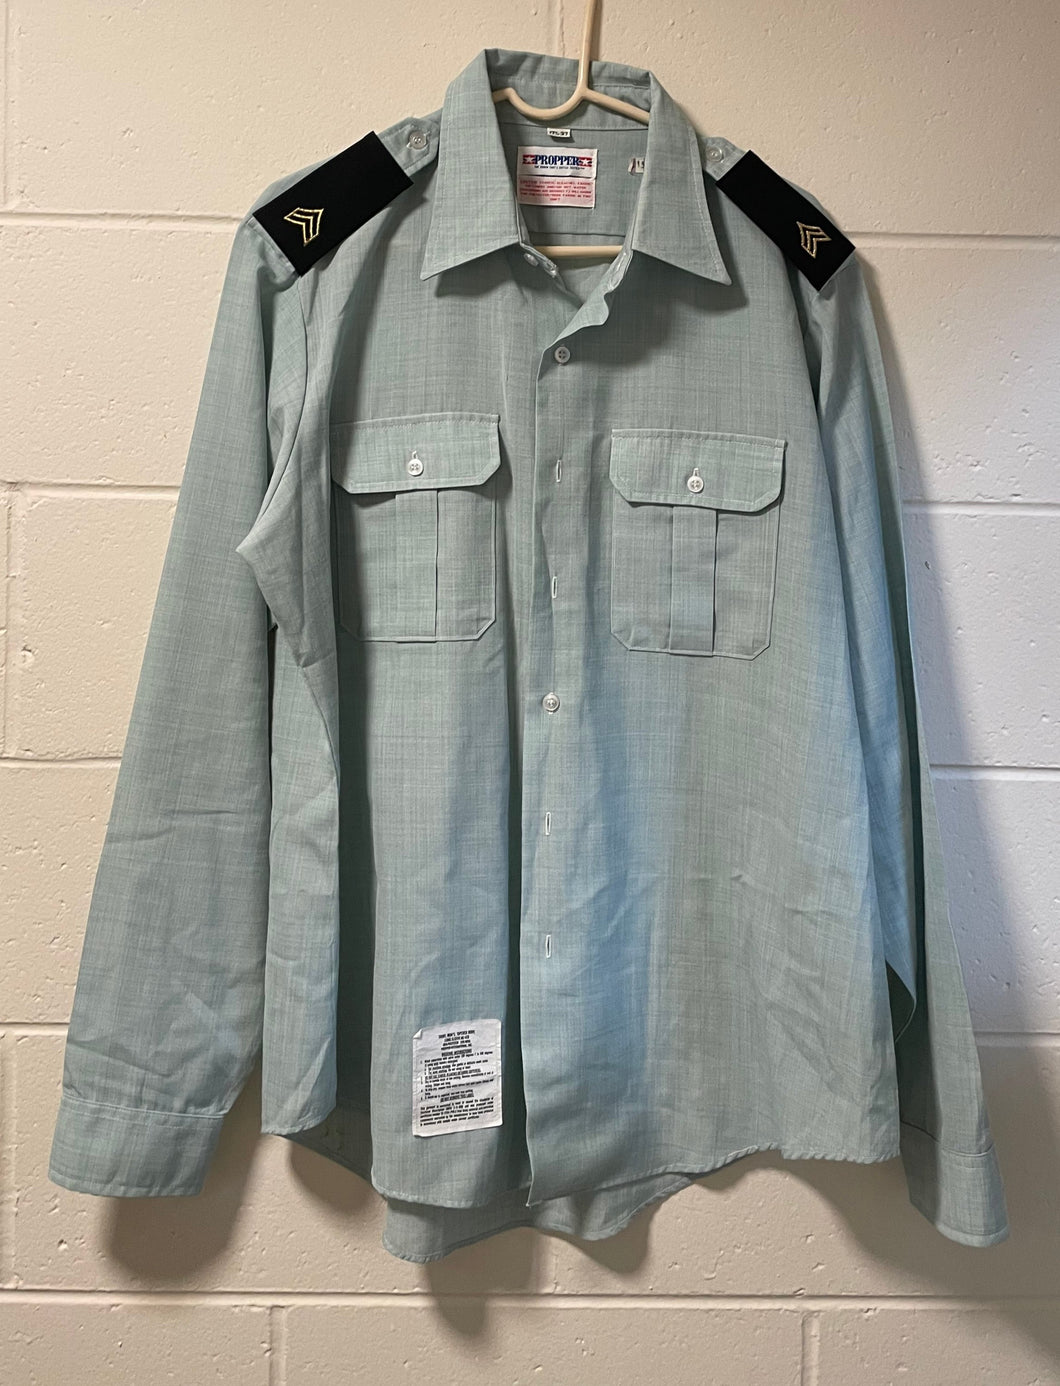 FRONT VIEW ARMY CLASS B SHIRT WITH SARGENT RANK